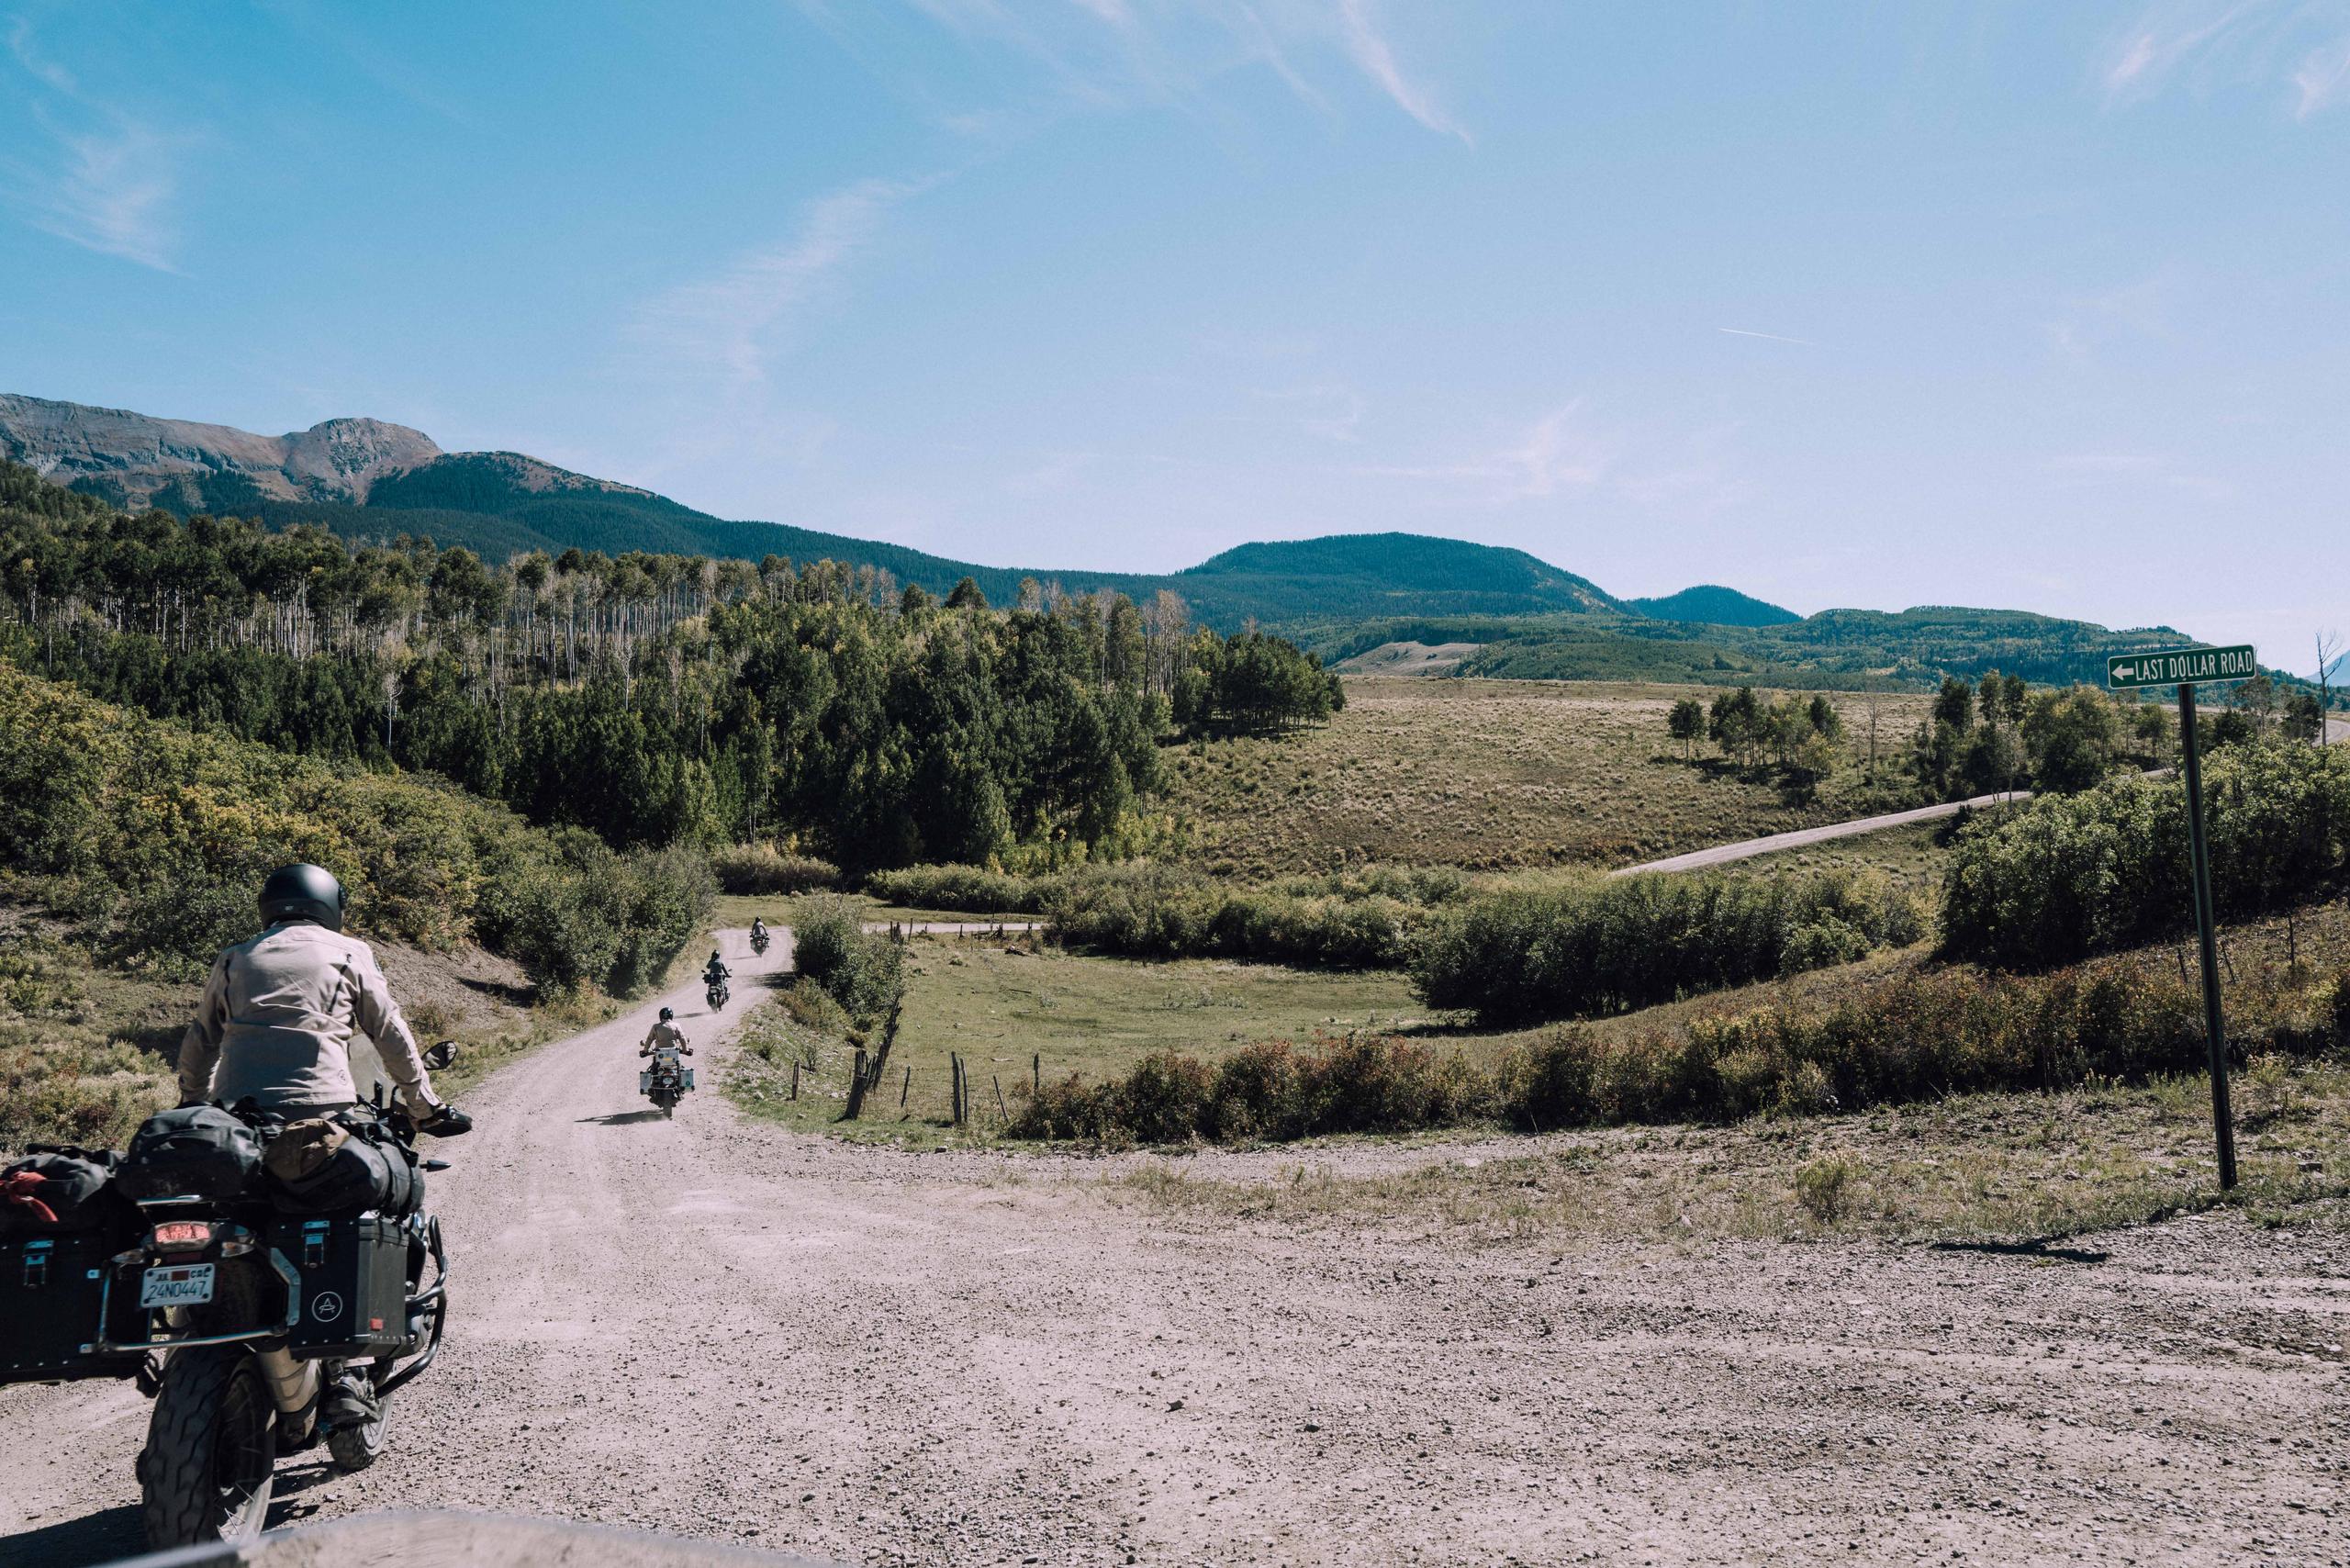 Motorcyclists riding on gravel road towards Rocky Mountains